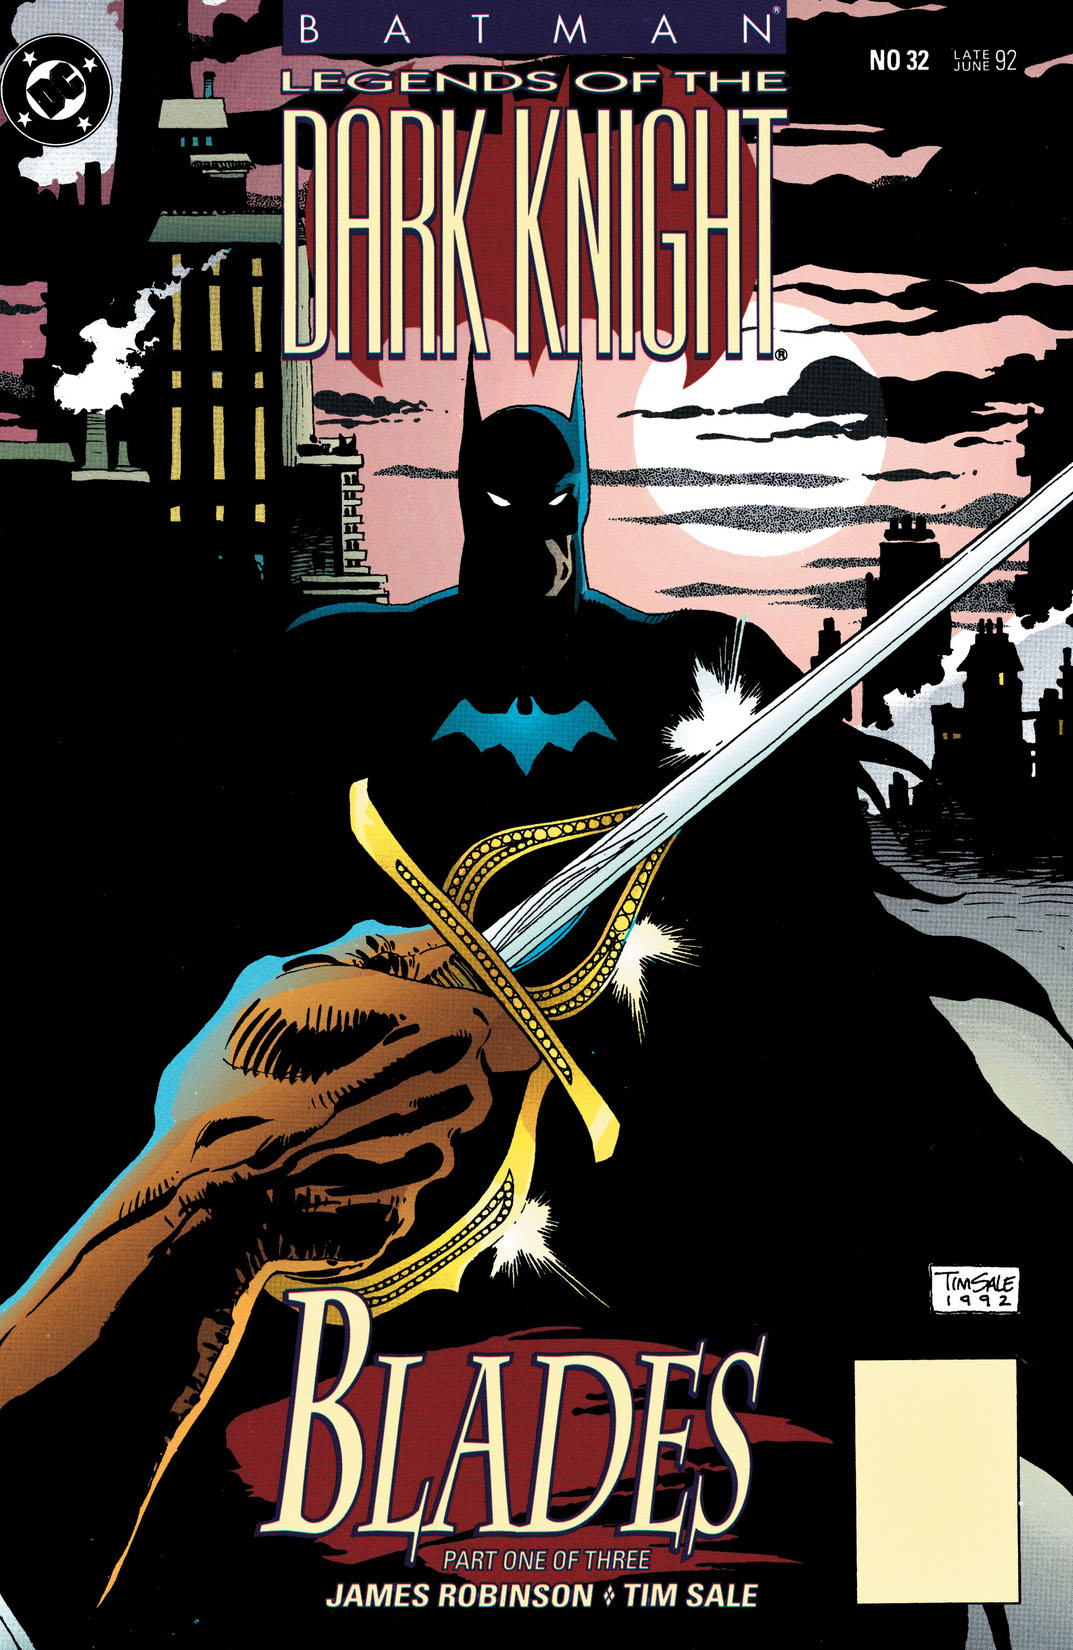 Batman: Legends of the Dark Knight #32 preview images